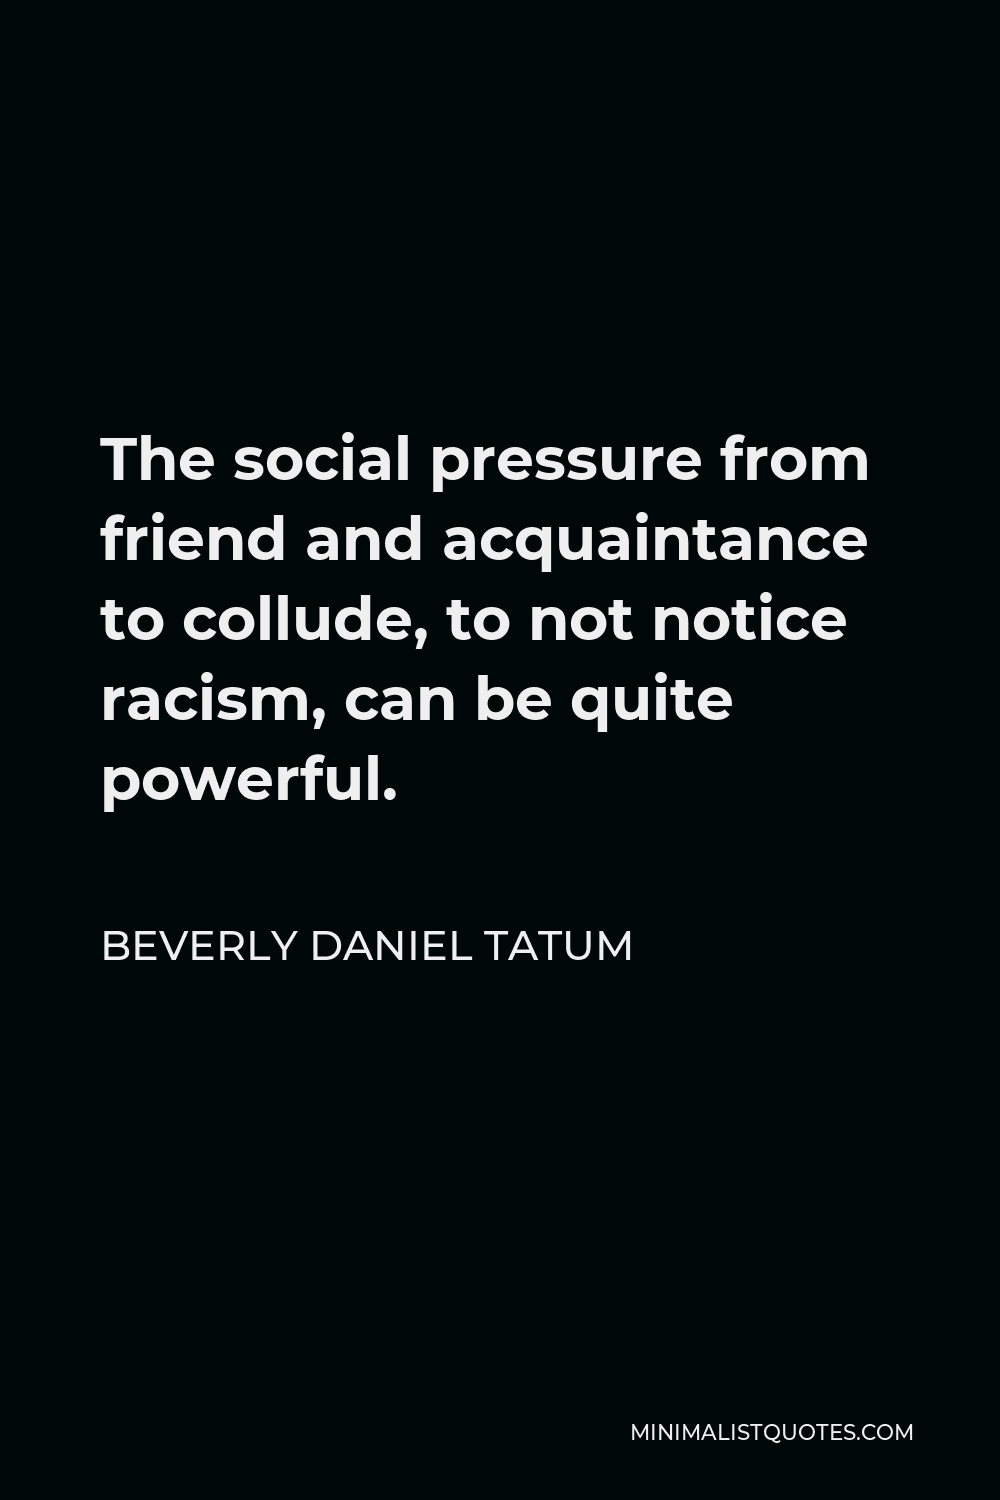 Beverly Daniel Tatum Quote - The social pressure from friend and acquaintance to collude, to not notice racism, can be quite powerful.